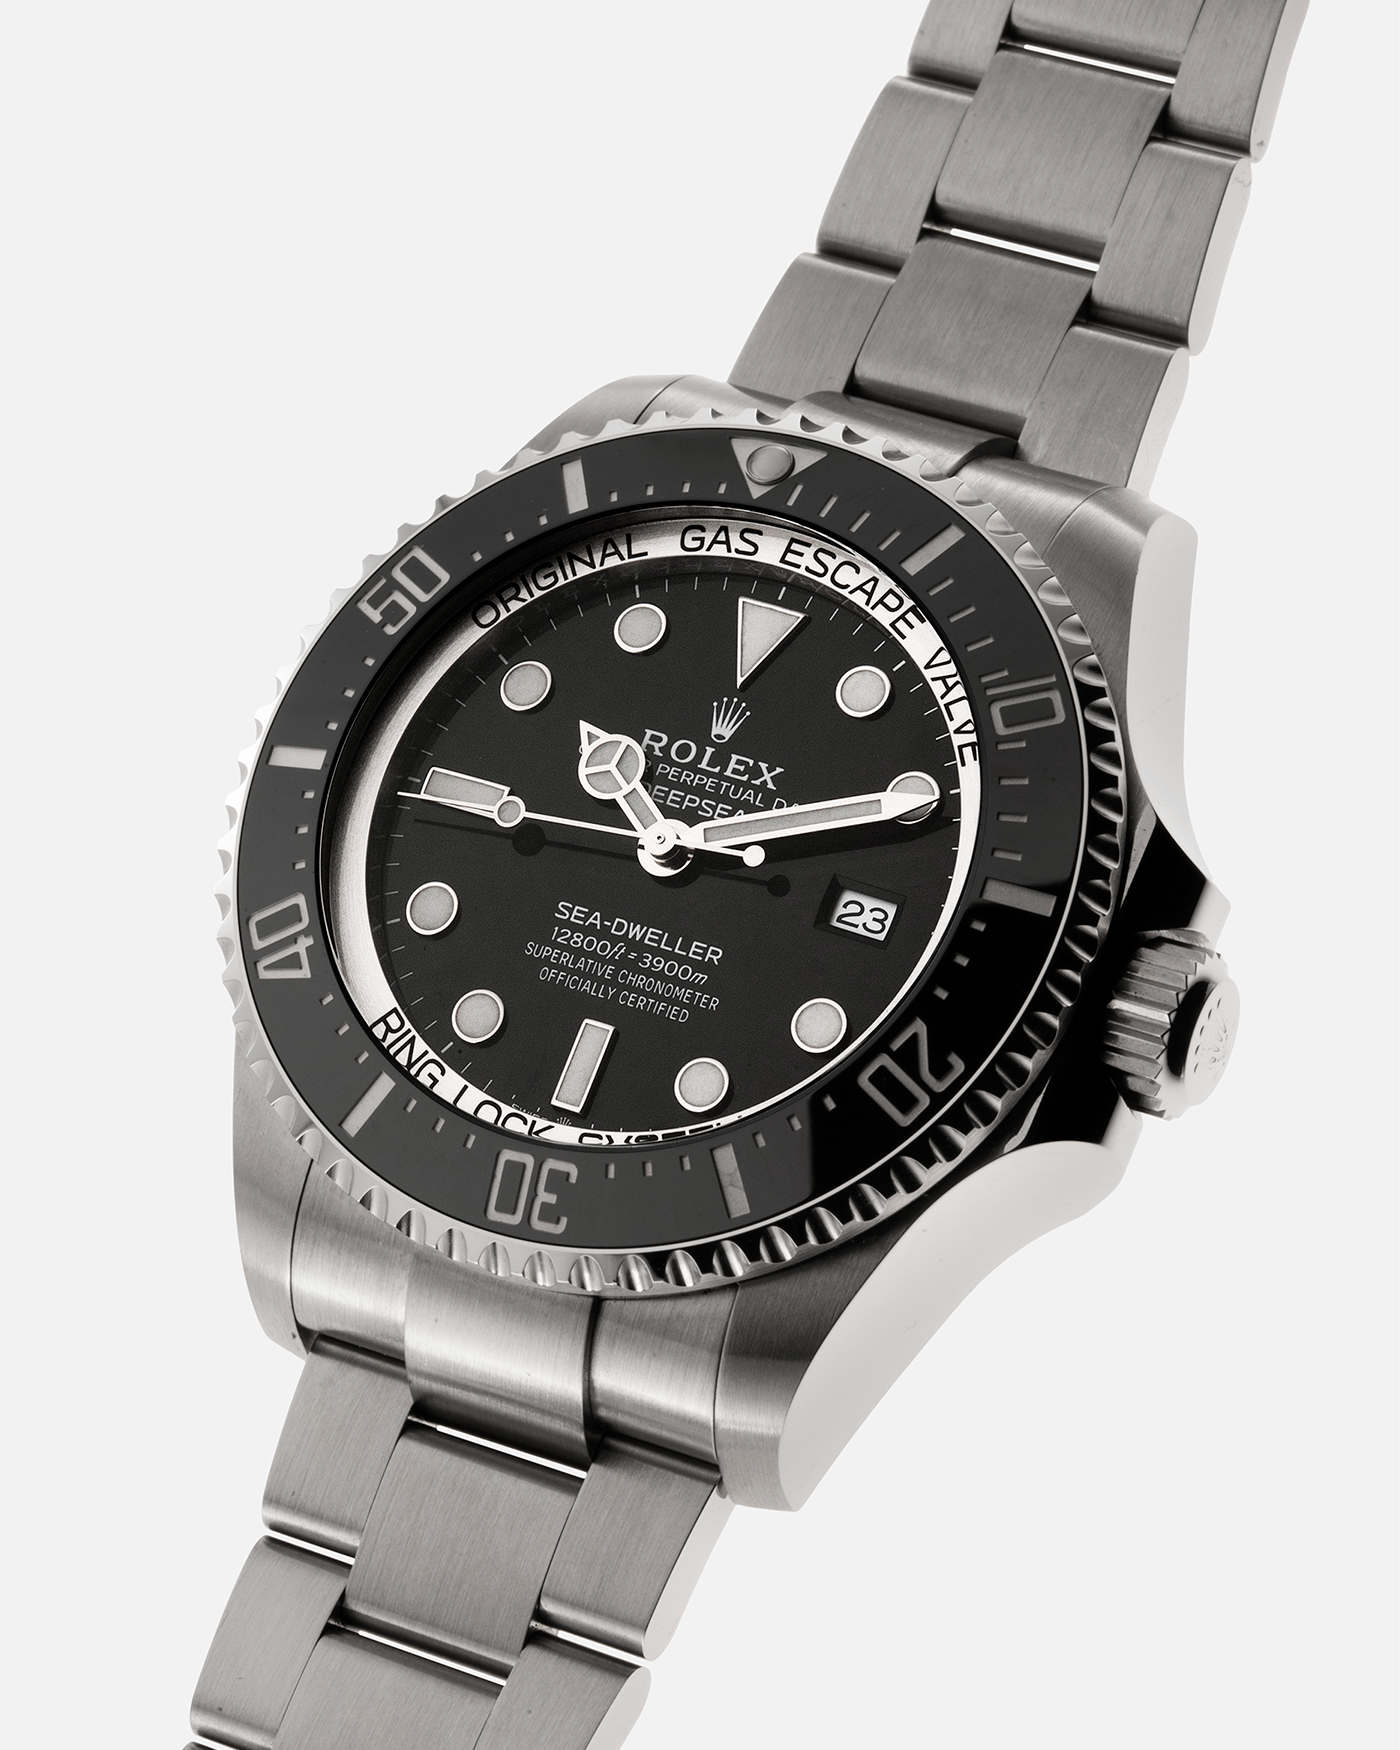 Brand: Rolex Year: 2018 Model: Deepsea Sea Dweller Reference Number: 126660 Material: Stainless Steel Movement: Rolex Cal. 3235, Self-Winding Case Diameter: 44mm Bracelet / Strap: Rolex 904L Steel Oyster Bracelet with Fliplock and Glidelock Extension System 